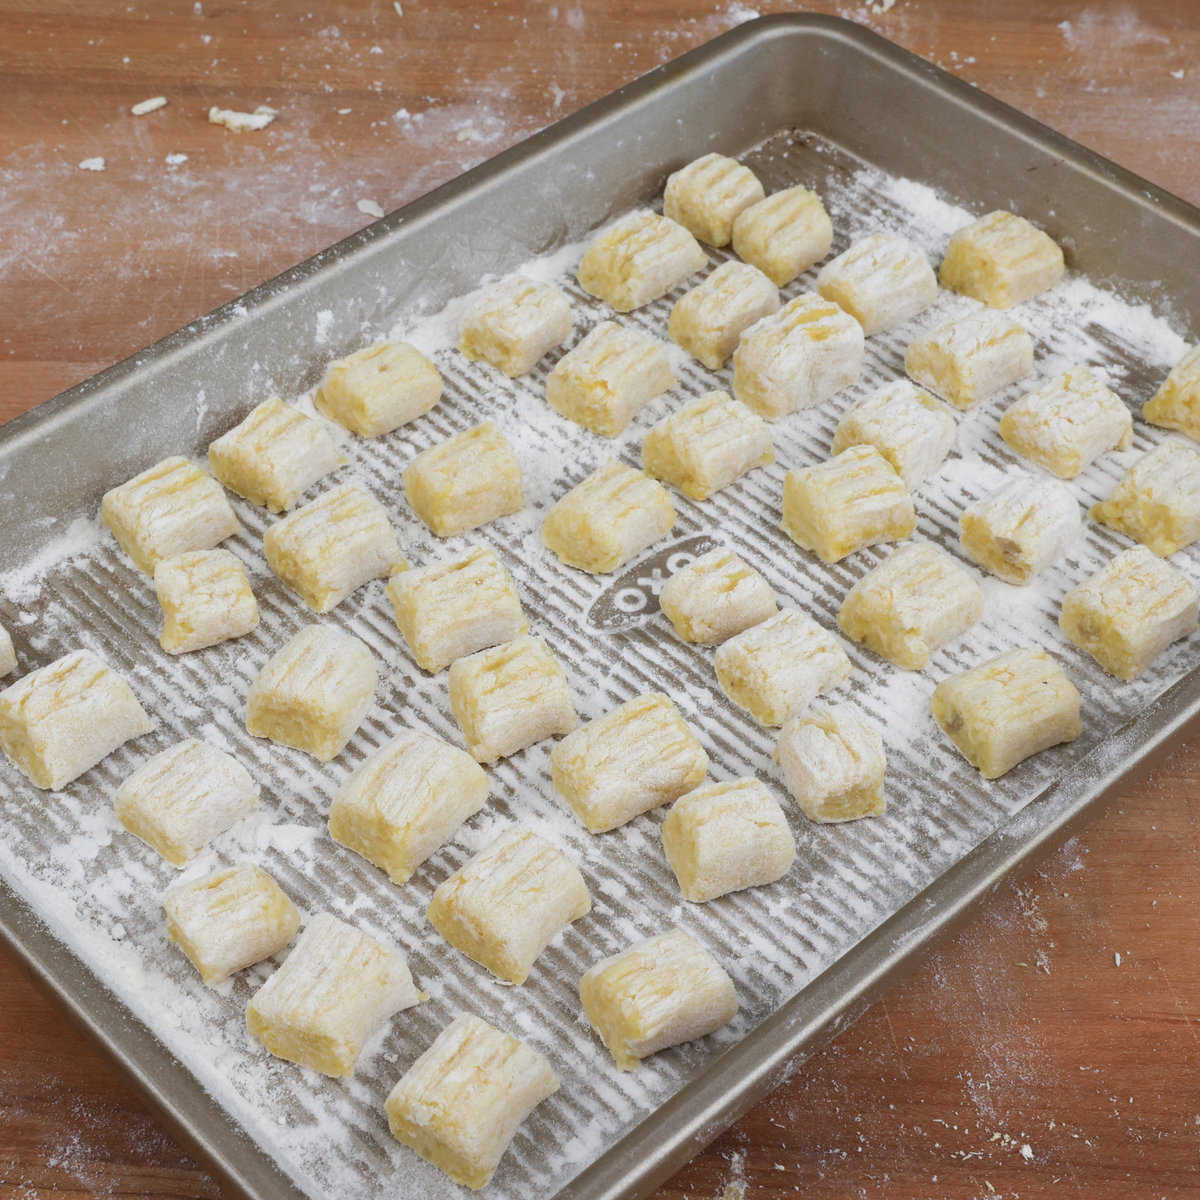 a rimmed baking sheet filled with uncooked potato gnocchi lightly dusted with flour.